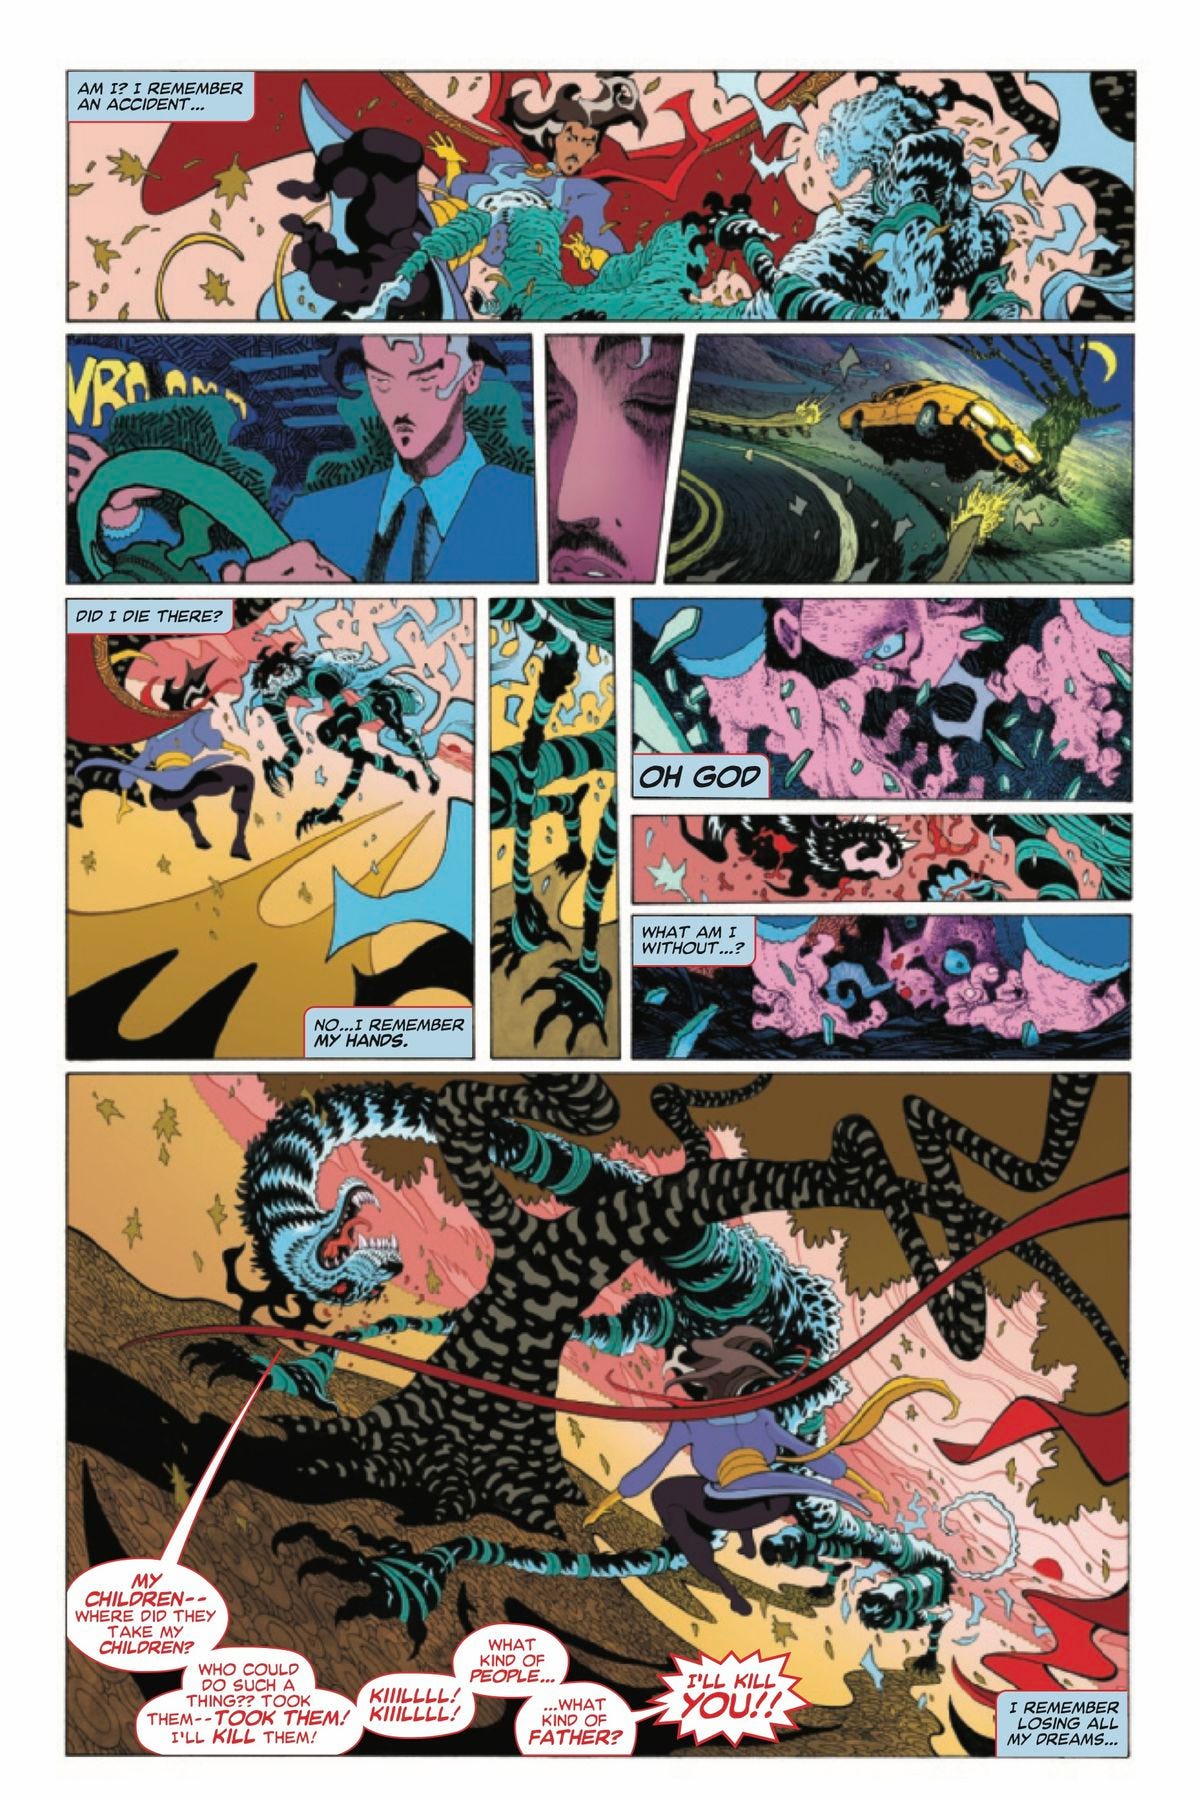 A page from Doctor Strange #1 (Marvel Comics, 2022) where dreamlike scenes from Doctor Strange’s origin story are intercut with a scene in the present where Doctor Strange fights a ghost tiger.